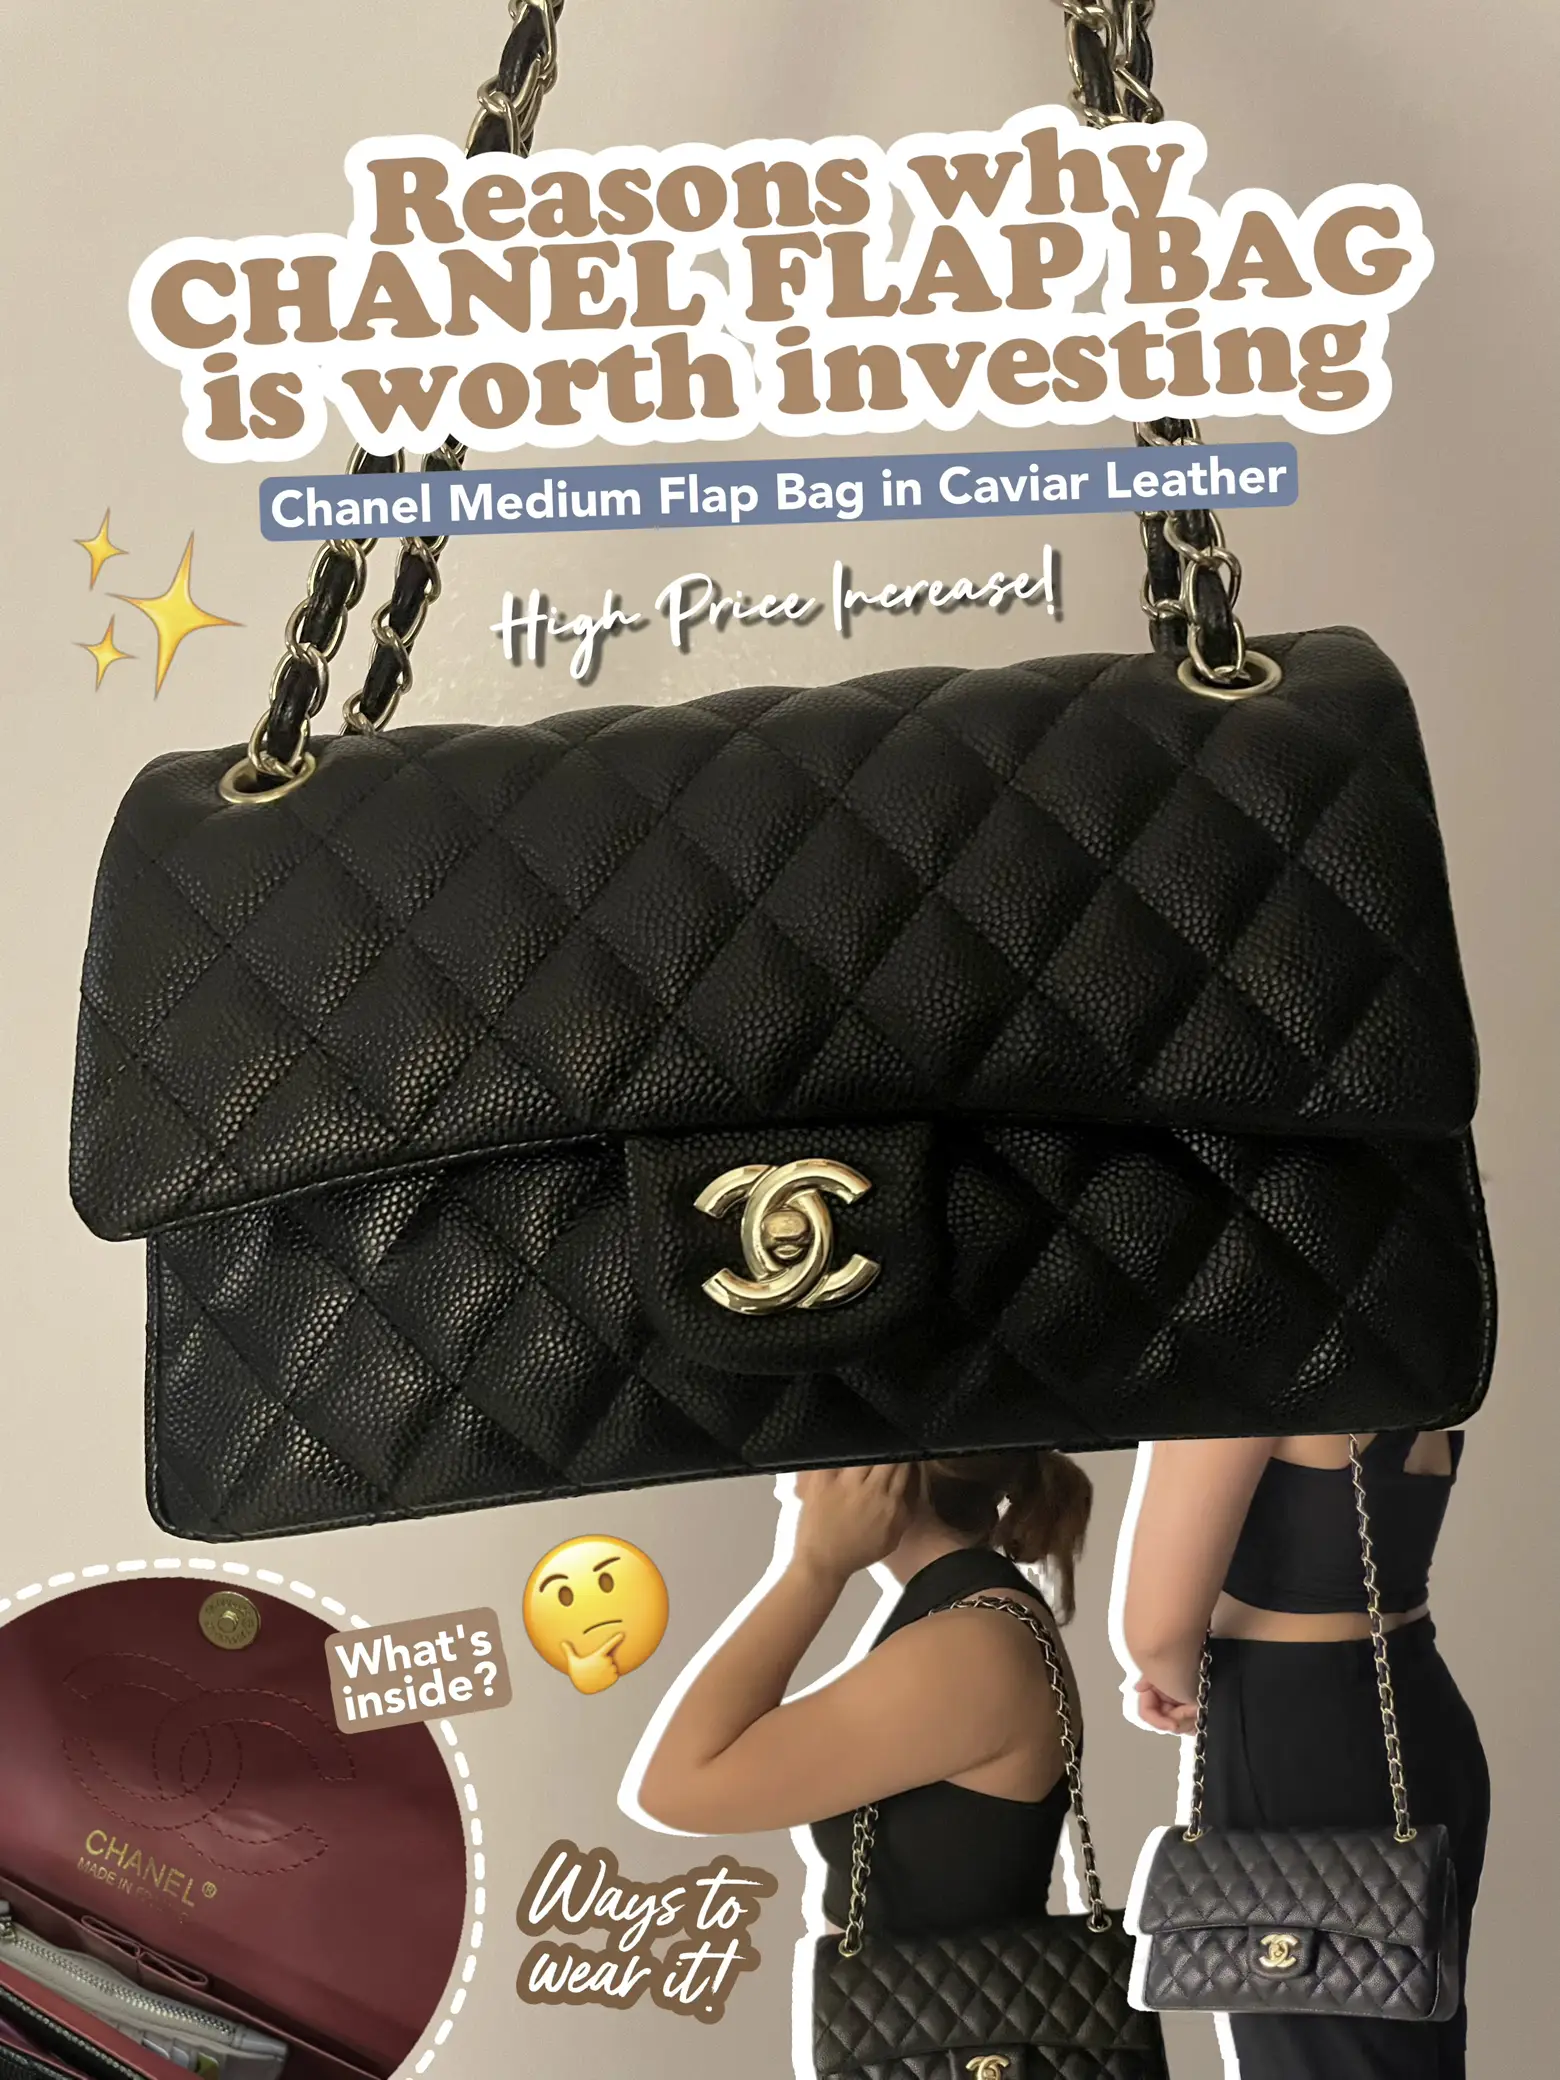 Why Chanel Bag is the most worthy bag investment🤔💖, Gallery posted by  Sandra